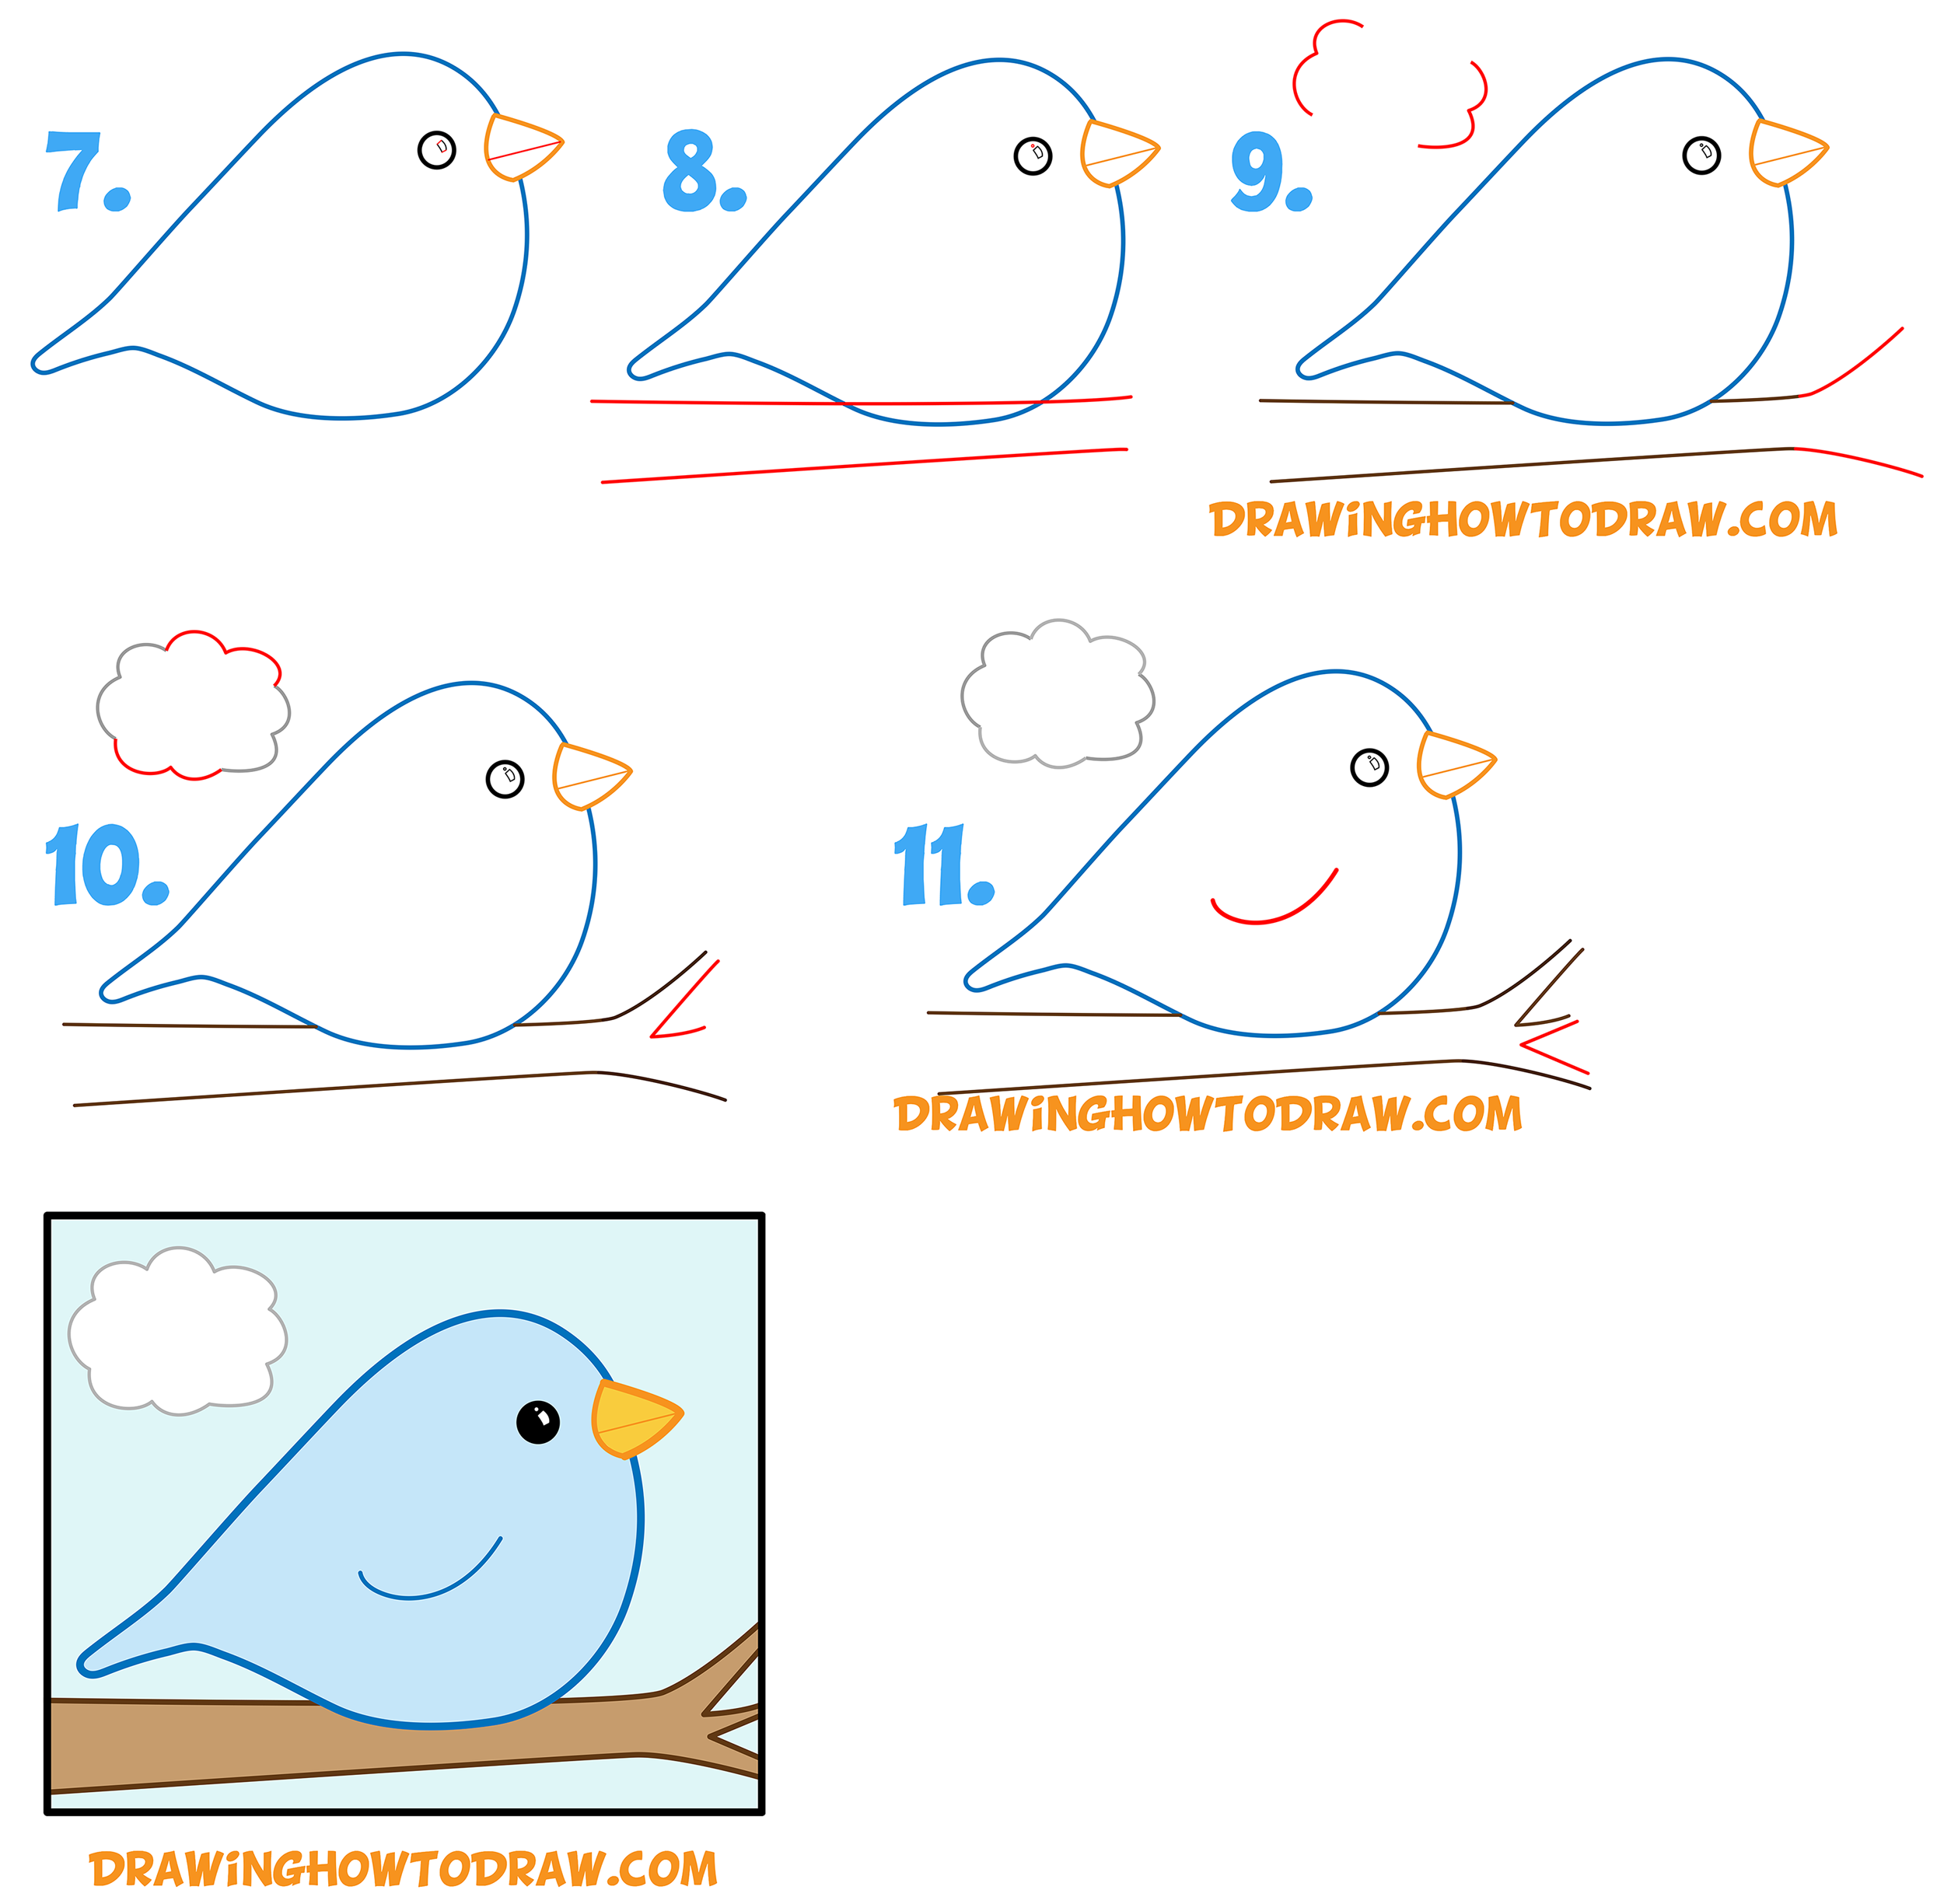 How to Draw a Cute Bird on a Branch Spring Artwork - Easy Step-by-Step Drawing Tutorial for Kids